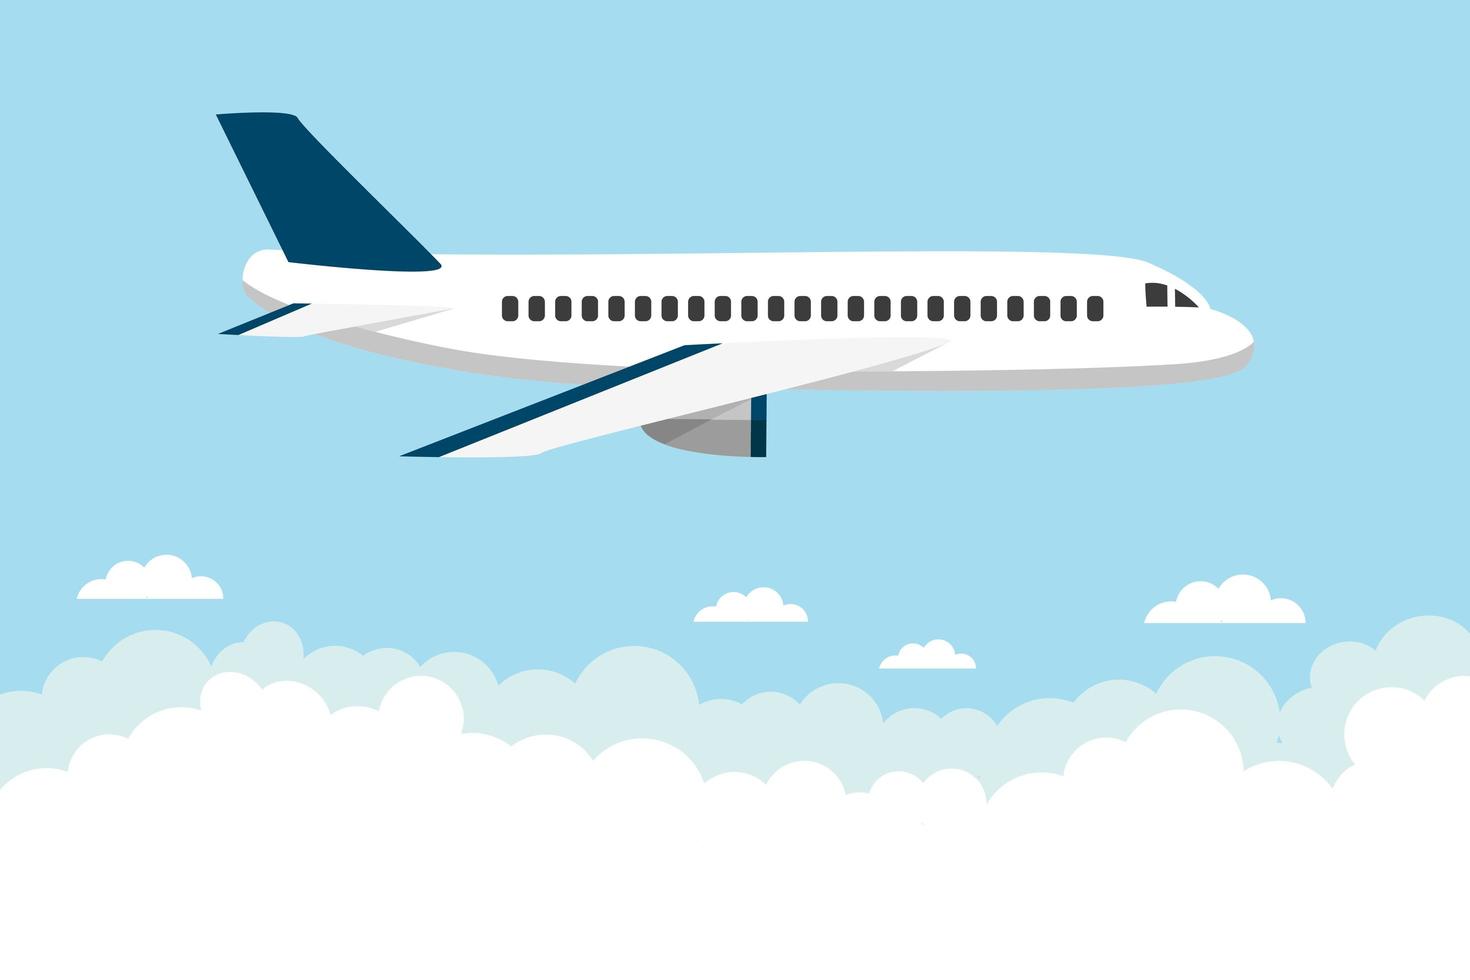 Airplane flying  over the clouds vector